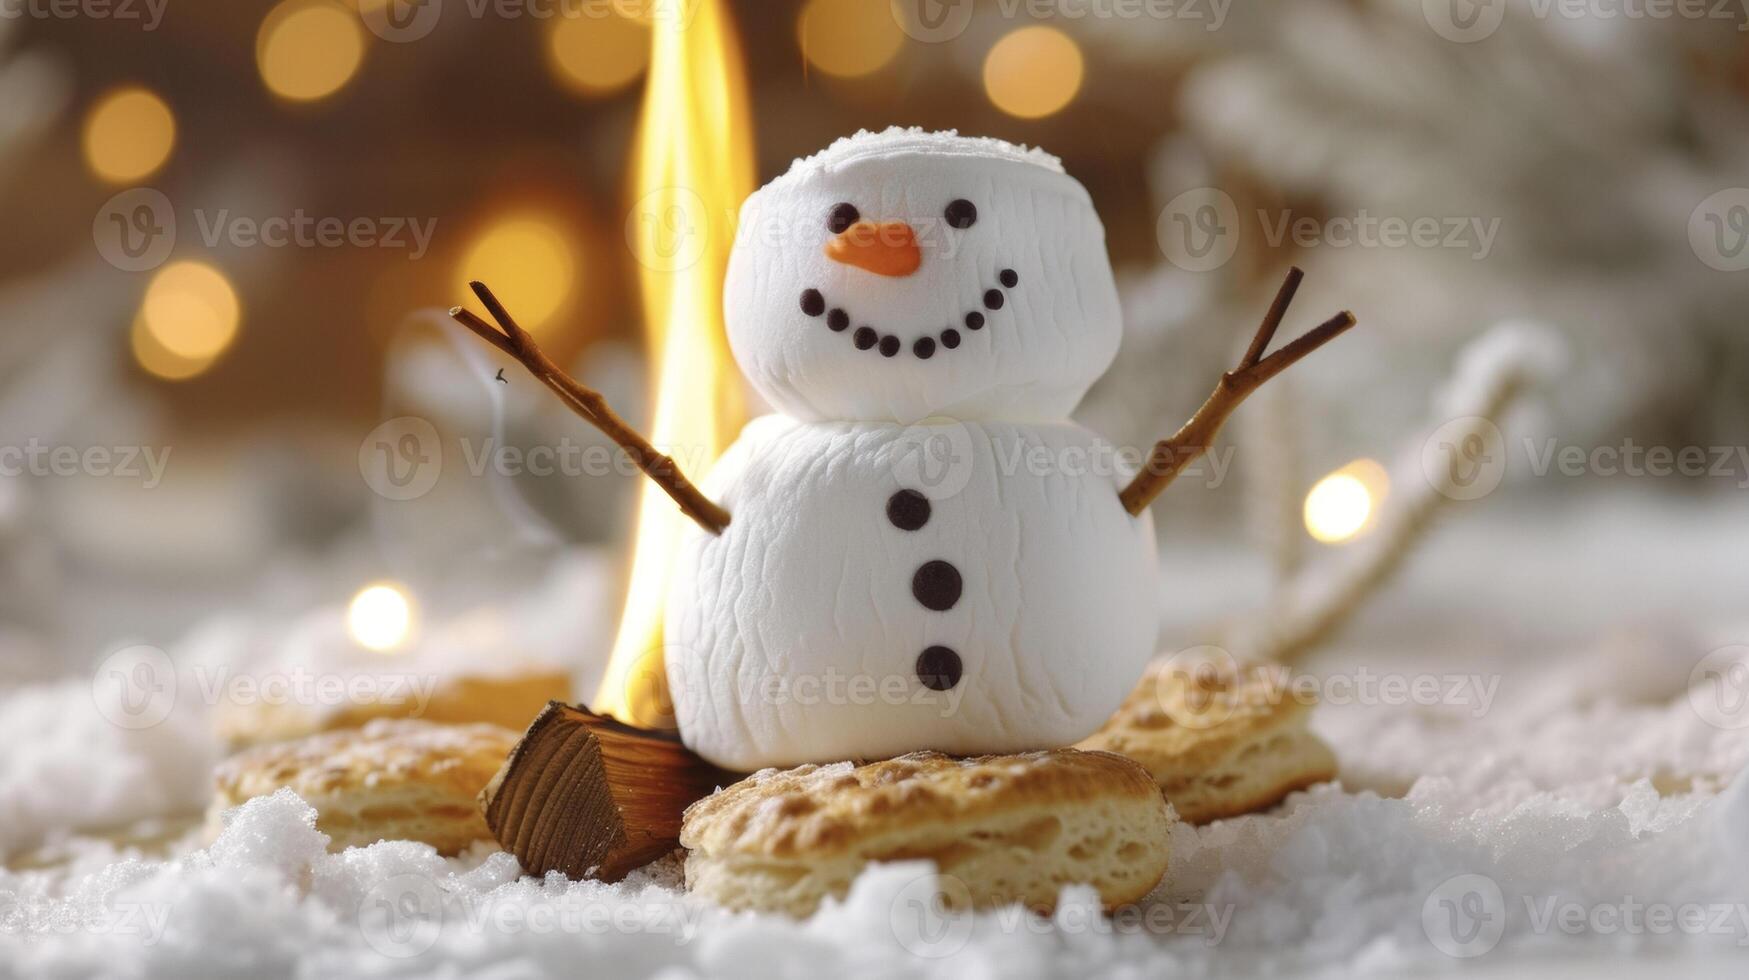 Perfect for a snow day or a holiday gathering this smoresinspired treat features a marshmallow snowman roasting over a crackling fire with a golden brown campfire biscui photo